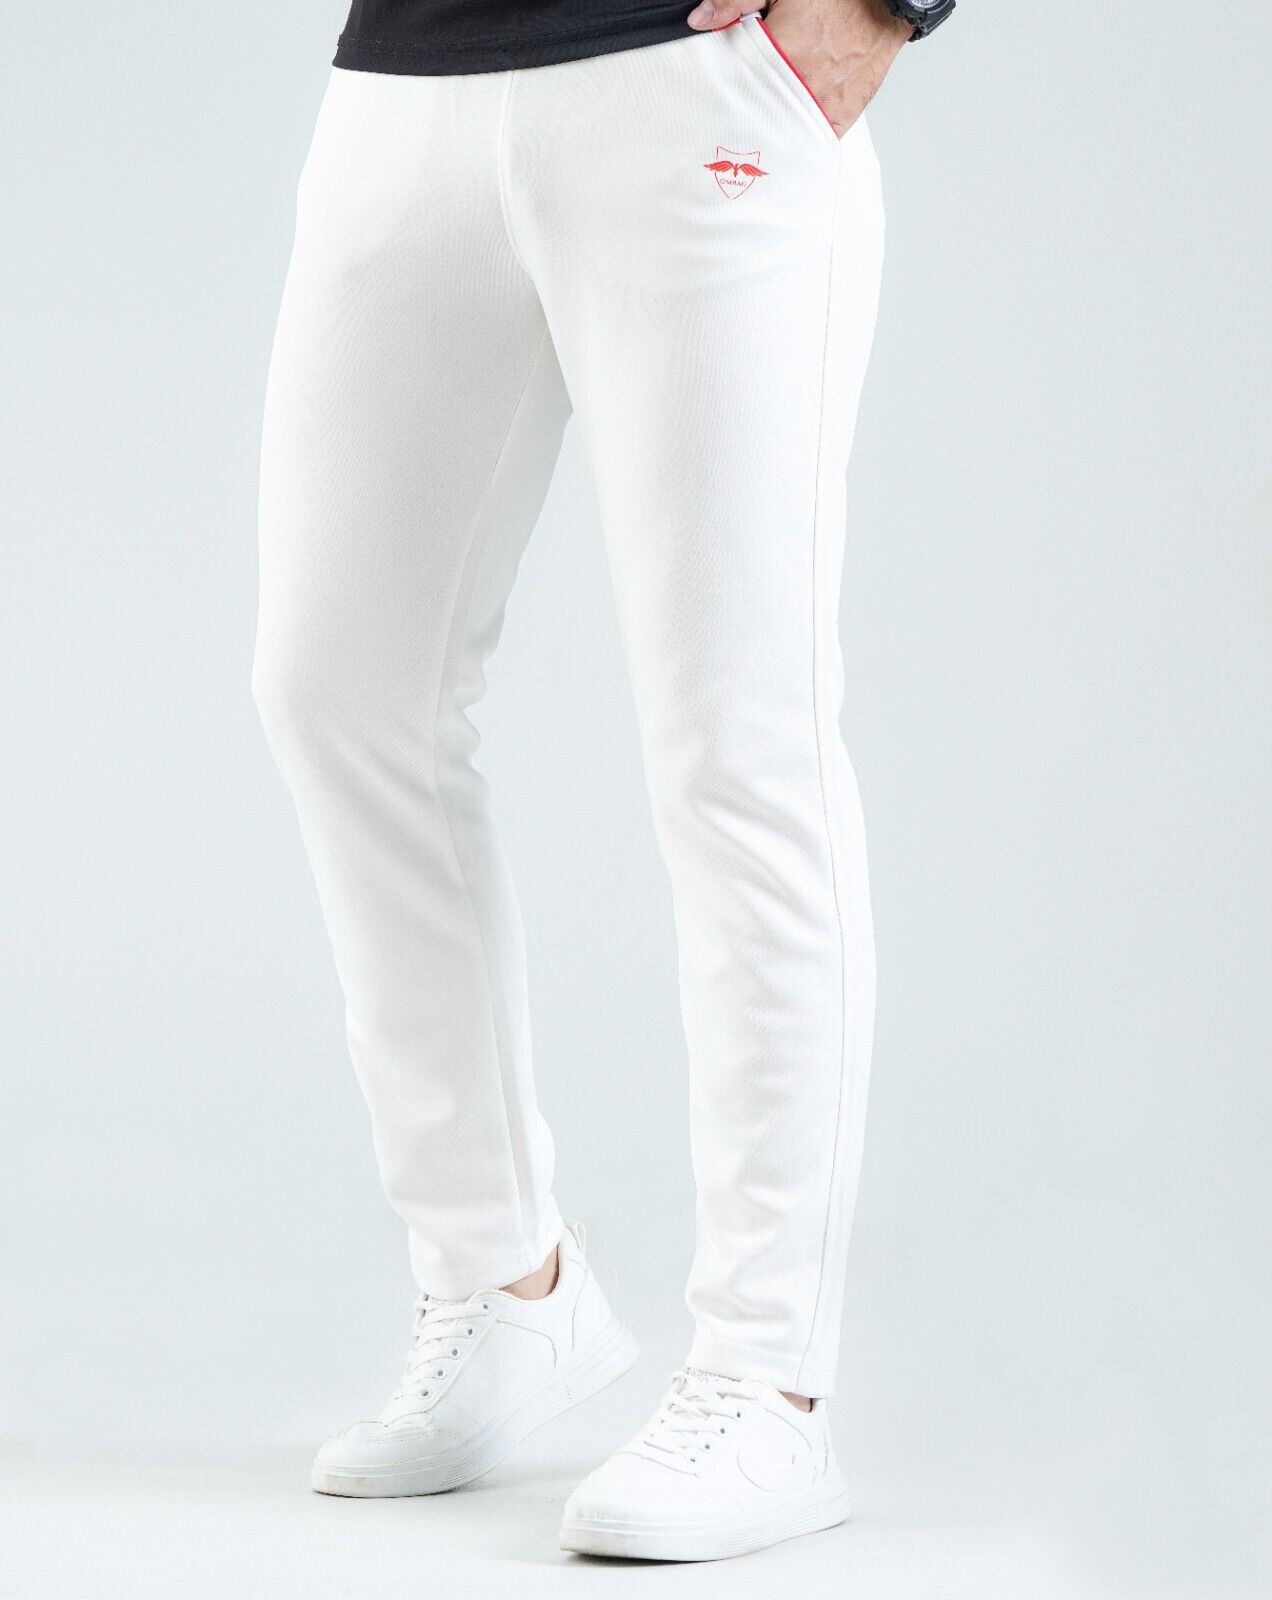 Buy SG Icon Trousers Online India| SG Cricket Pants Online Store